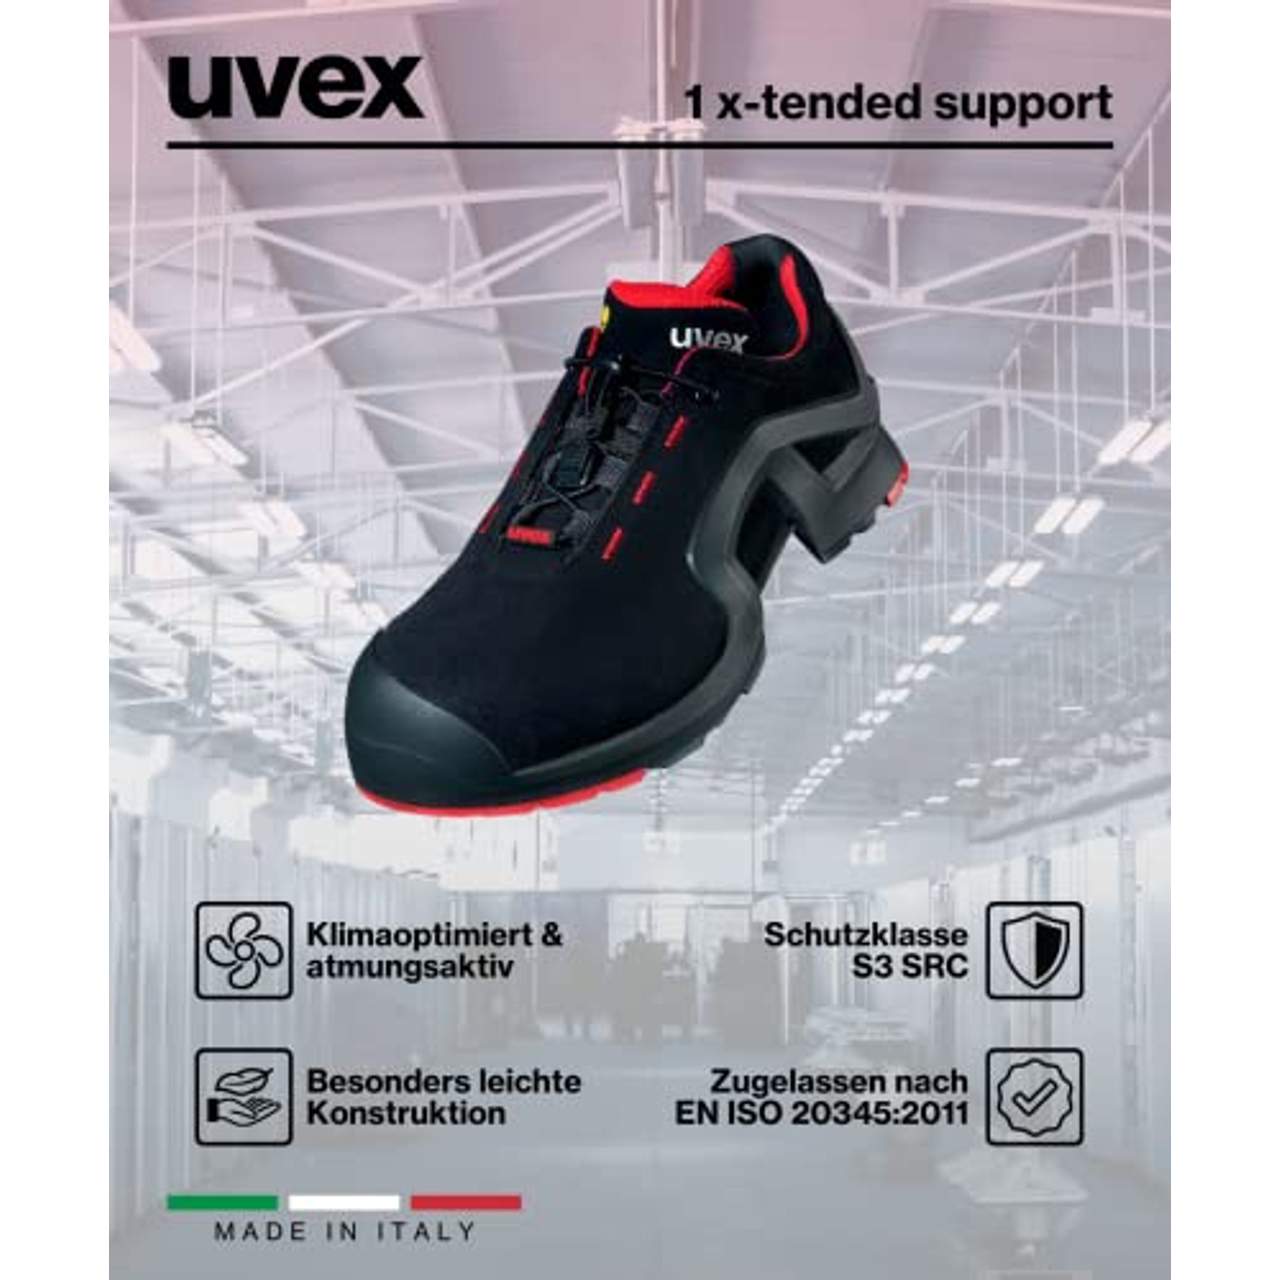 Uvex 1 Extended Support Arbeitsschuhe  S3 SRC ESD